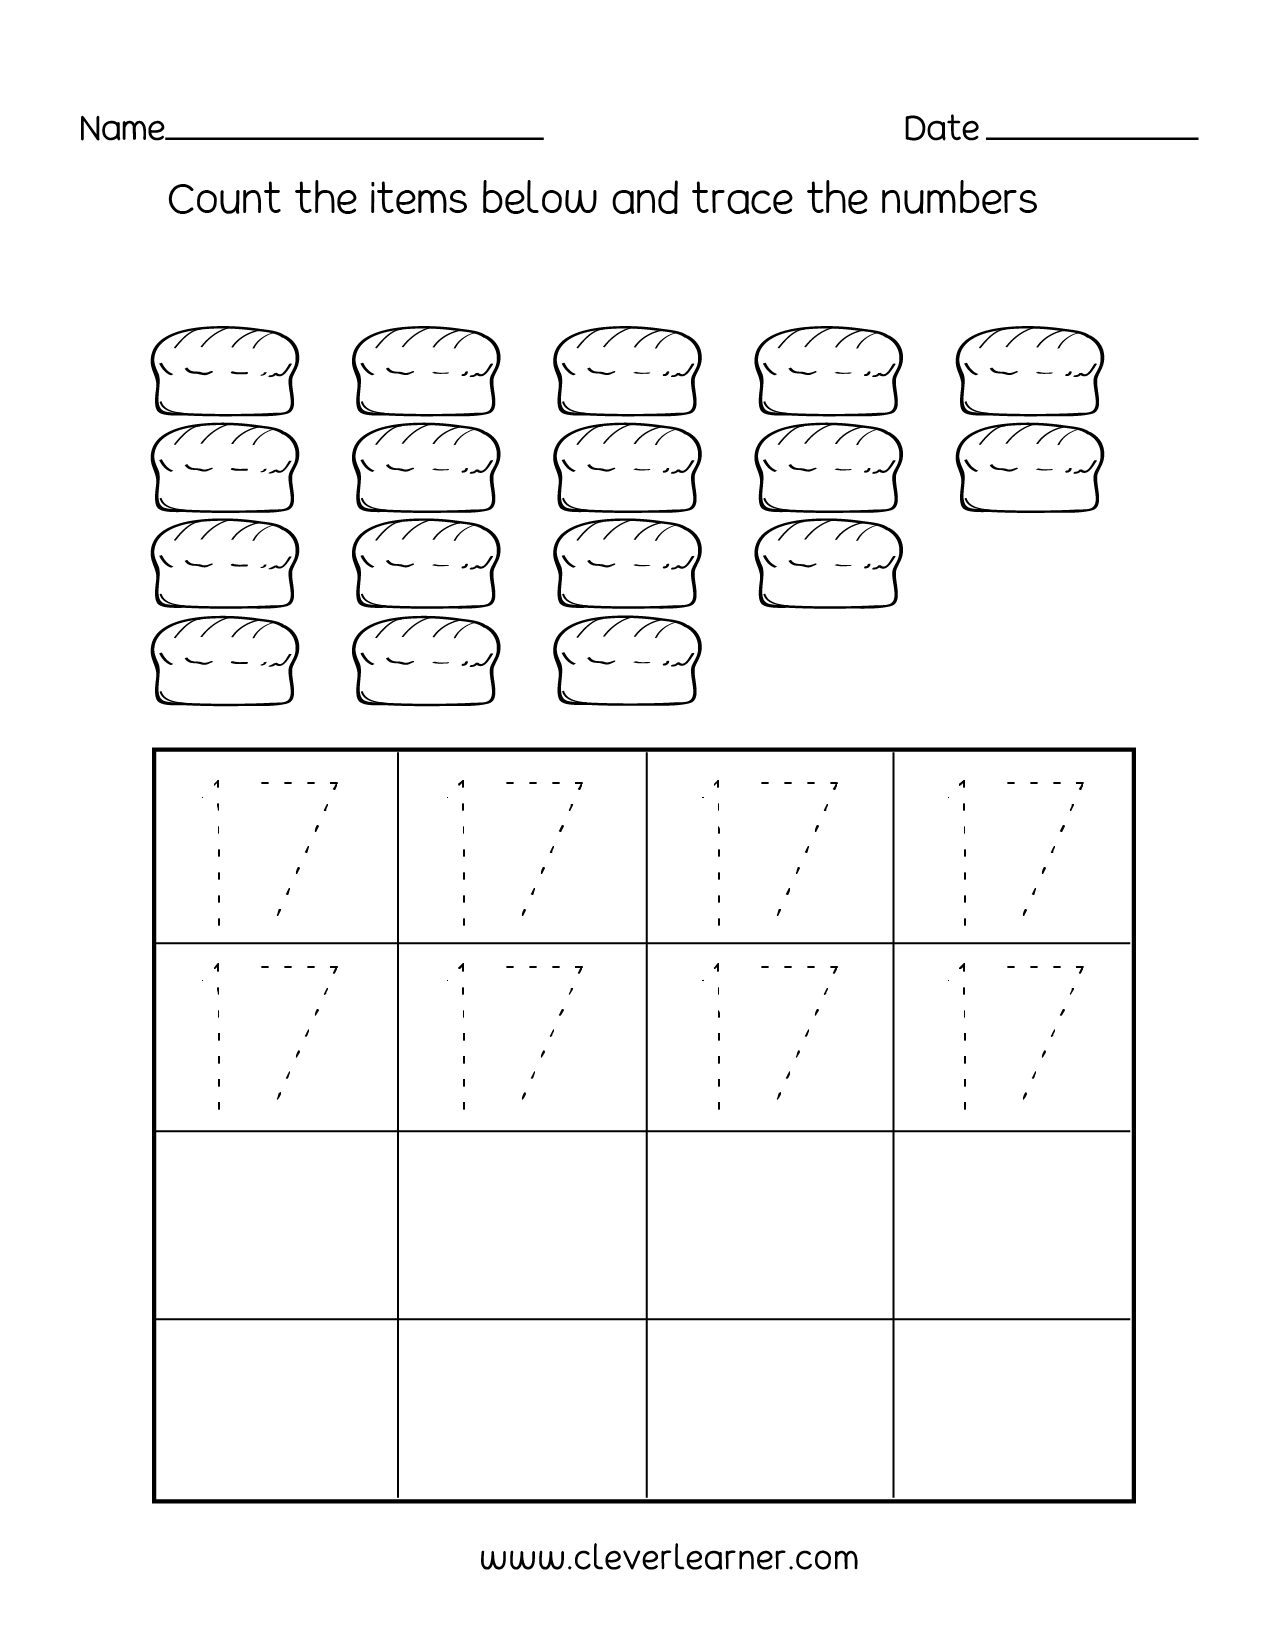 number-17-writing-counting-and-identification-printable-worksheets-for